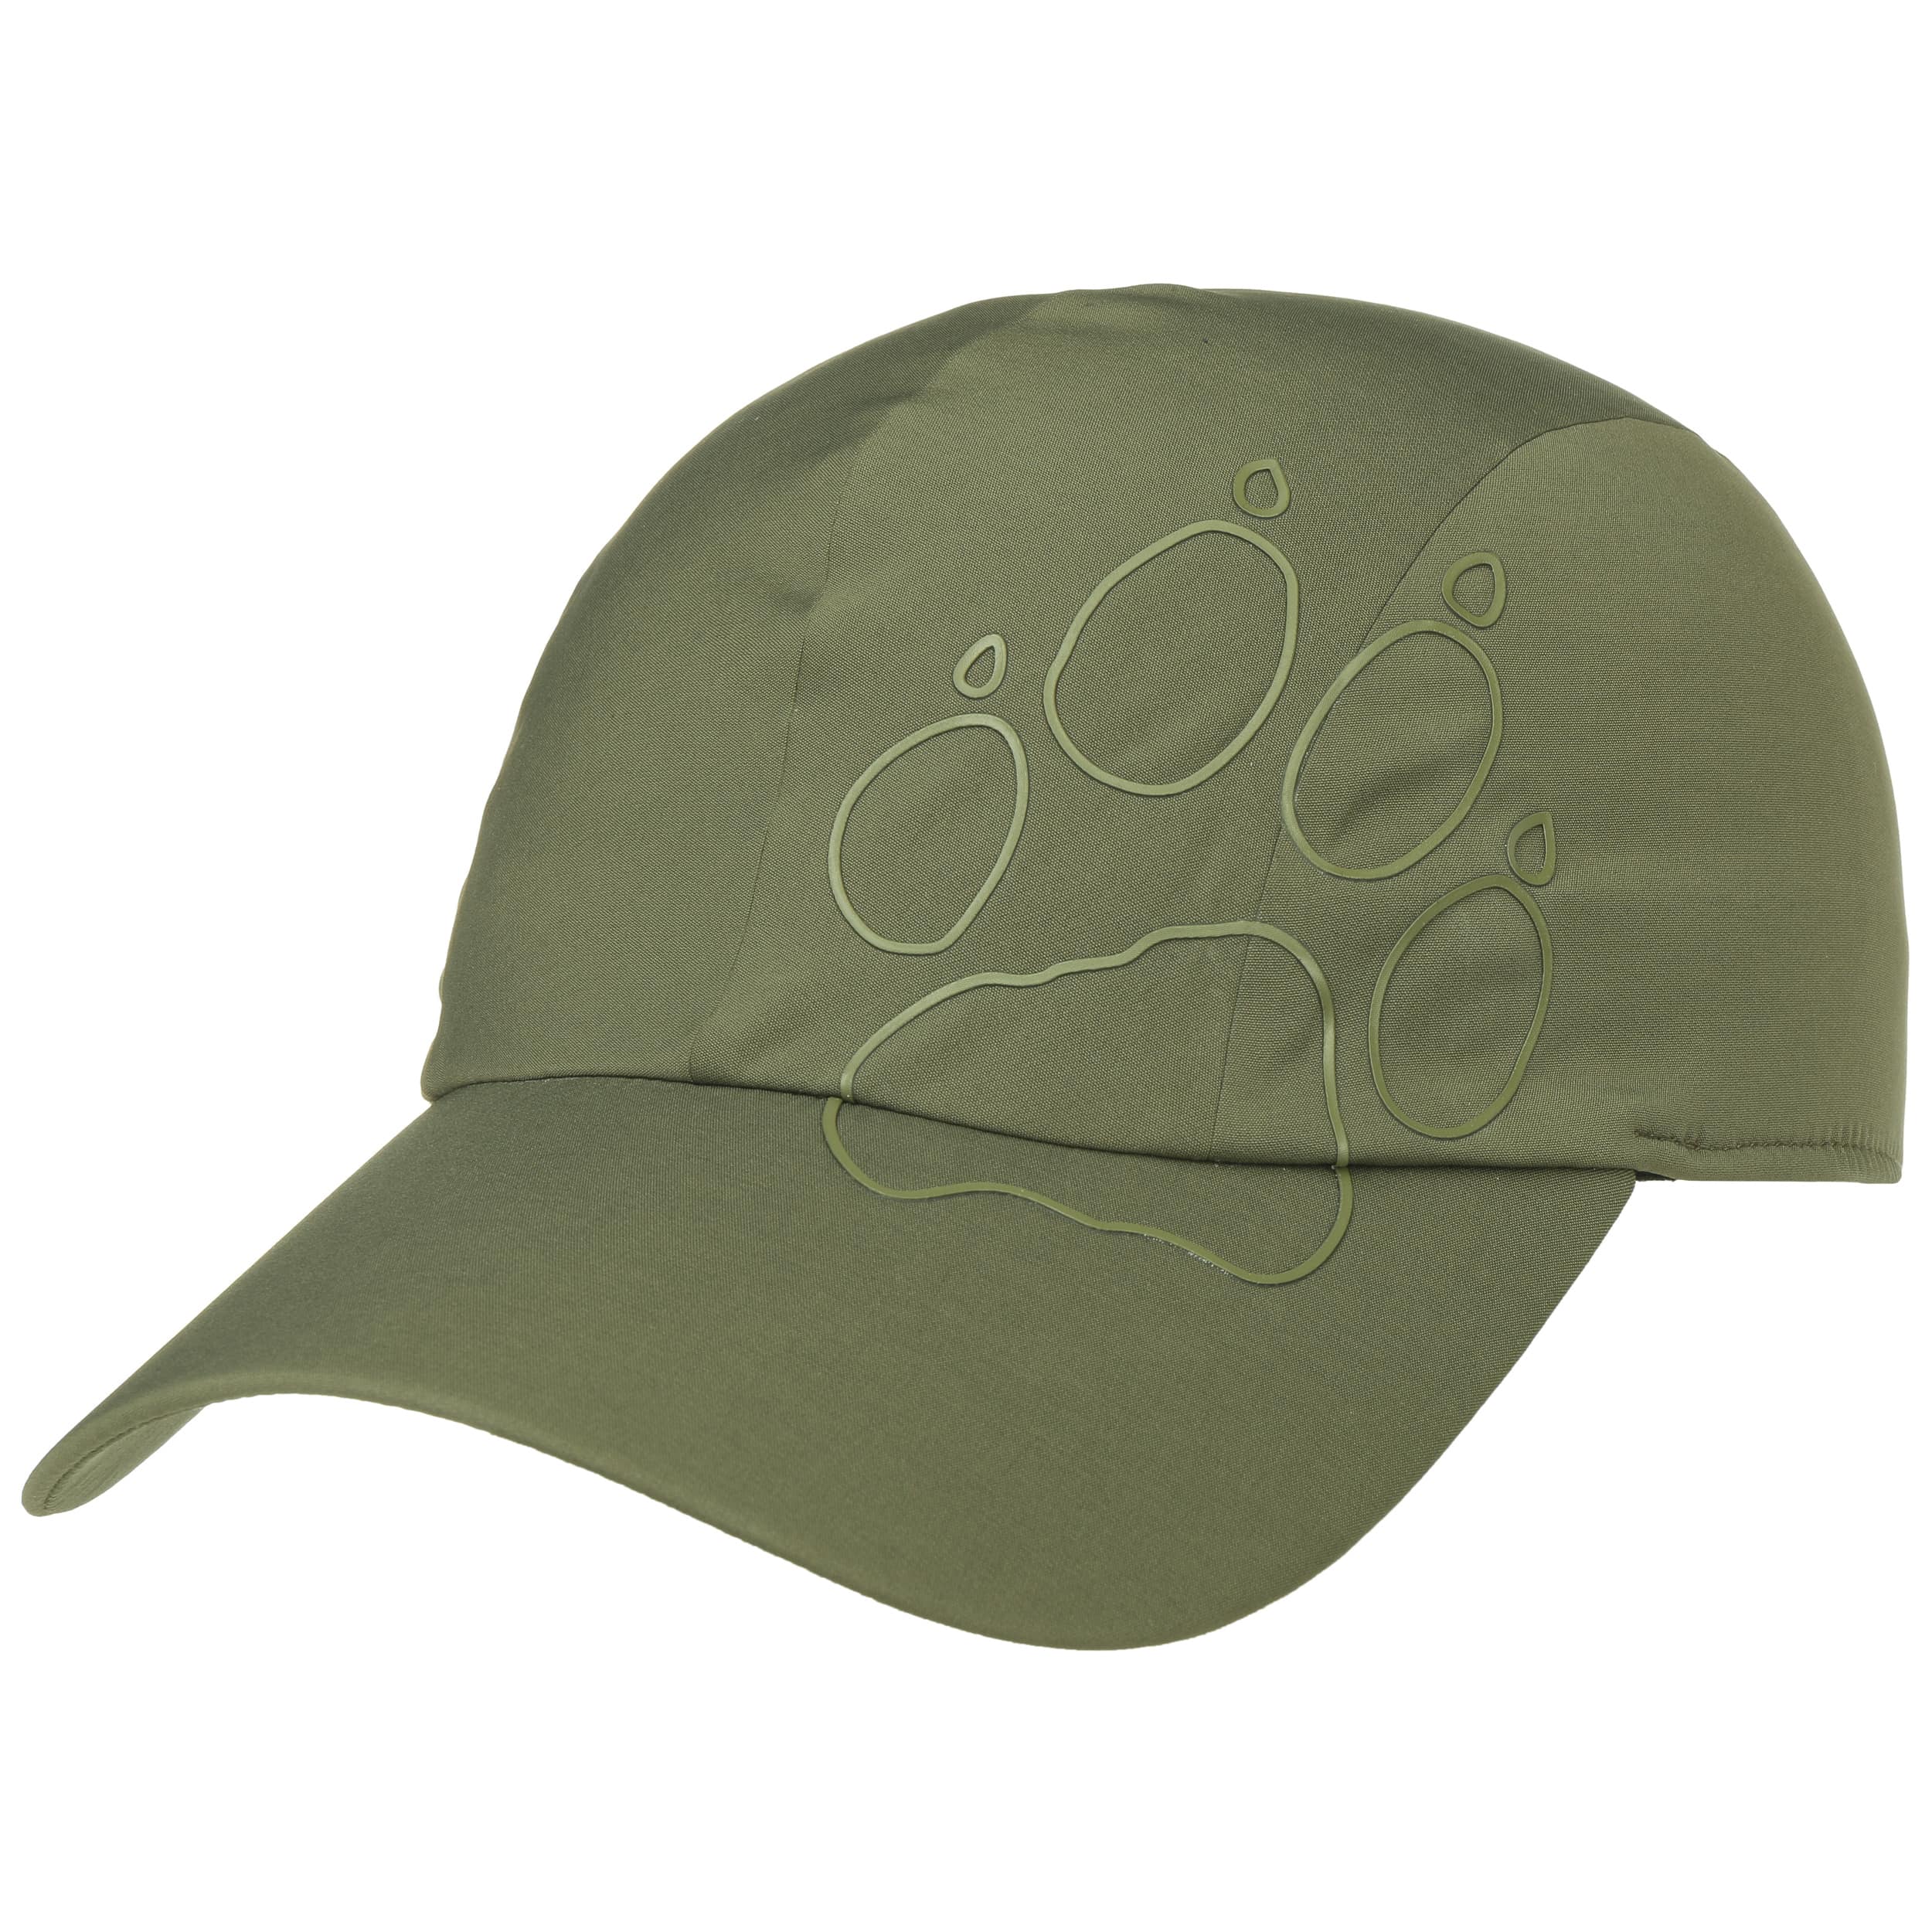 € Jack - Activate by Wolfskin 32,95 Fold-Away Cap